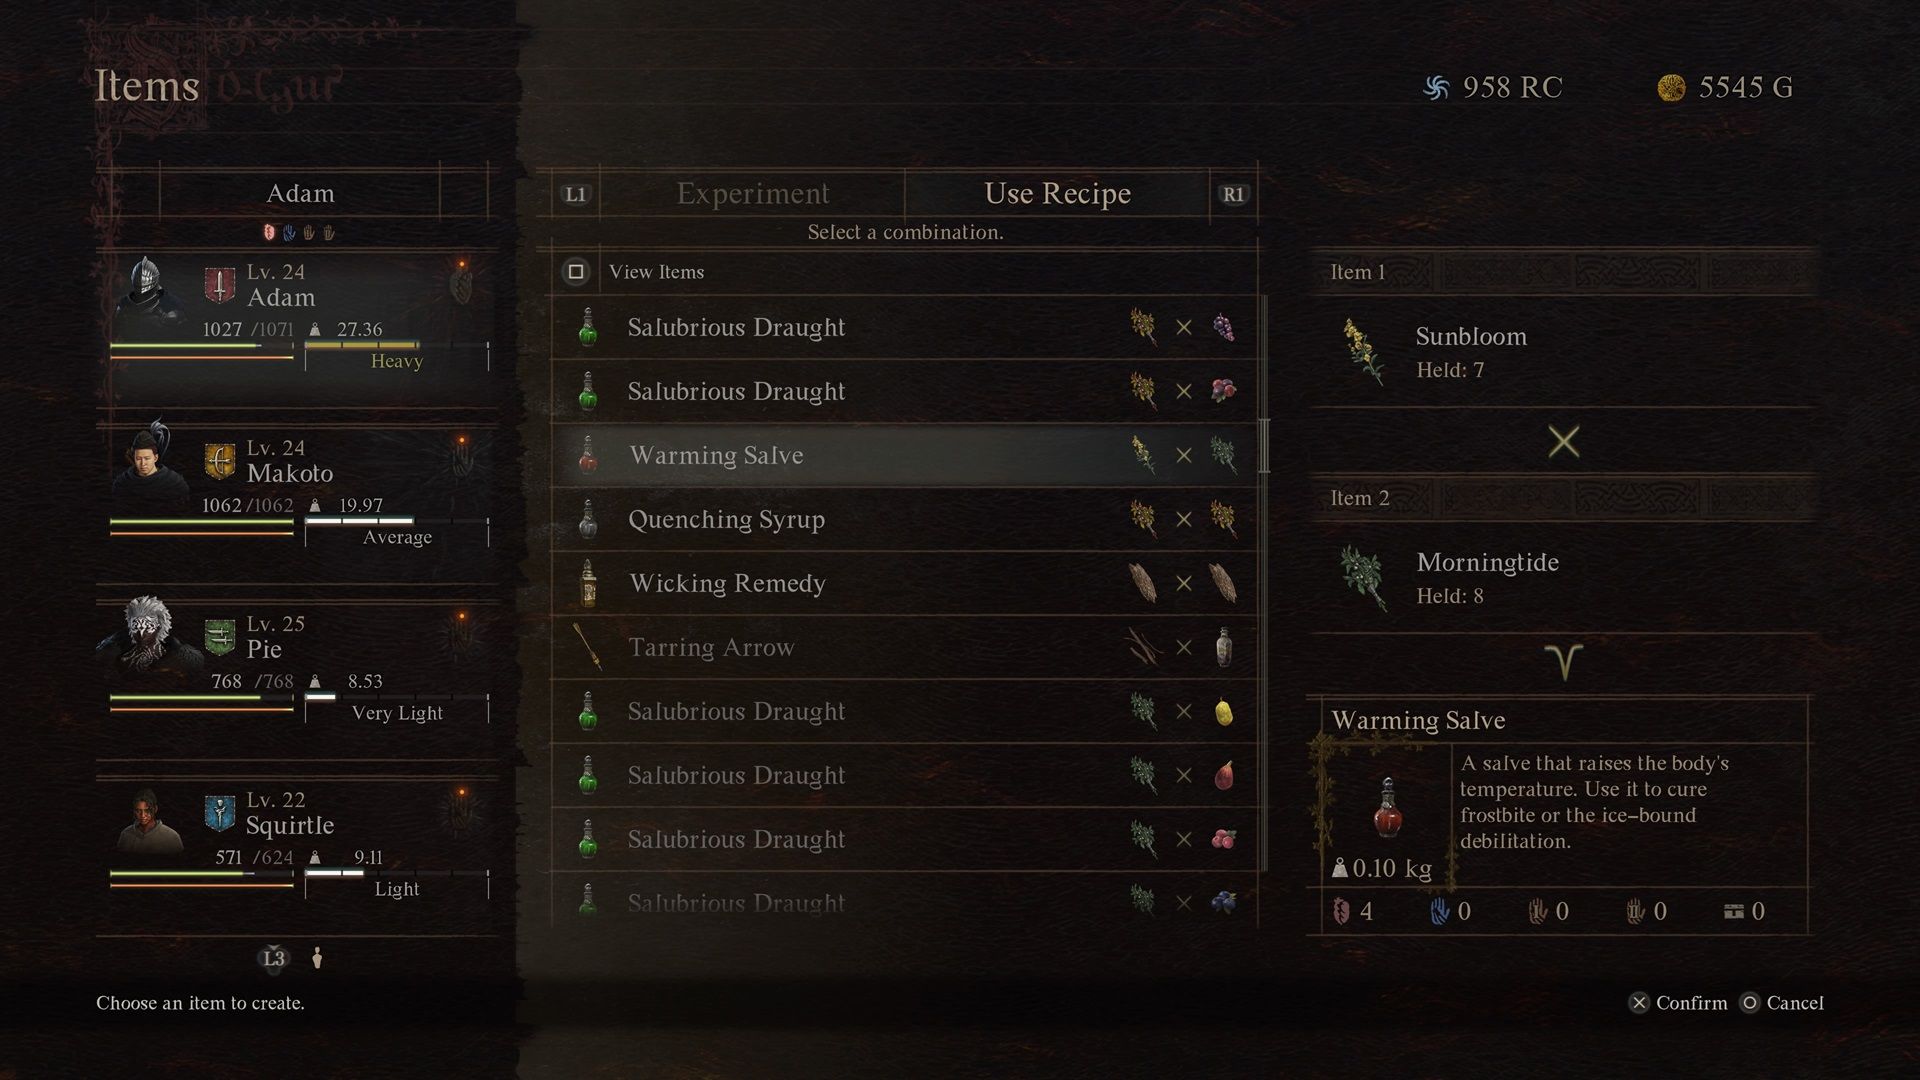 How to make Warming Salve in Dragon's Dogma 2